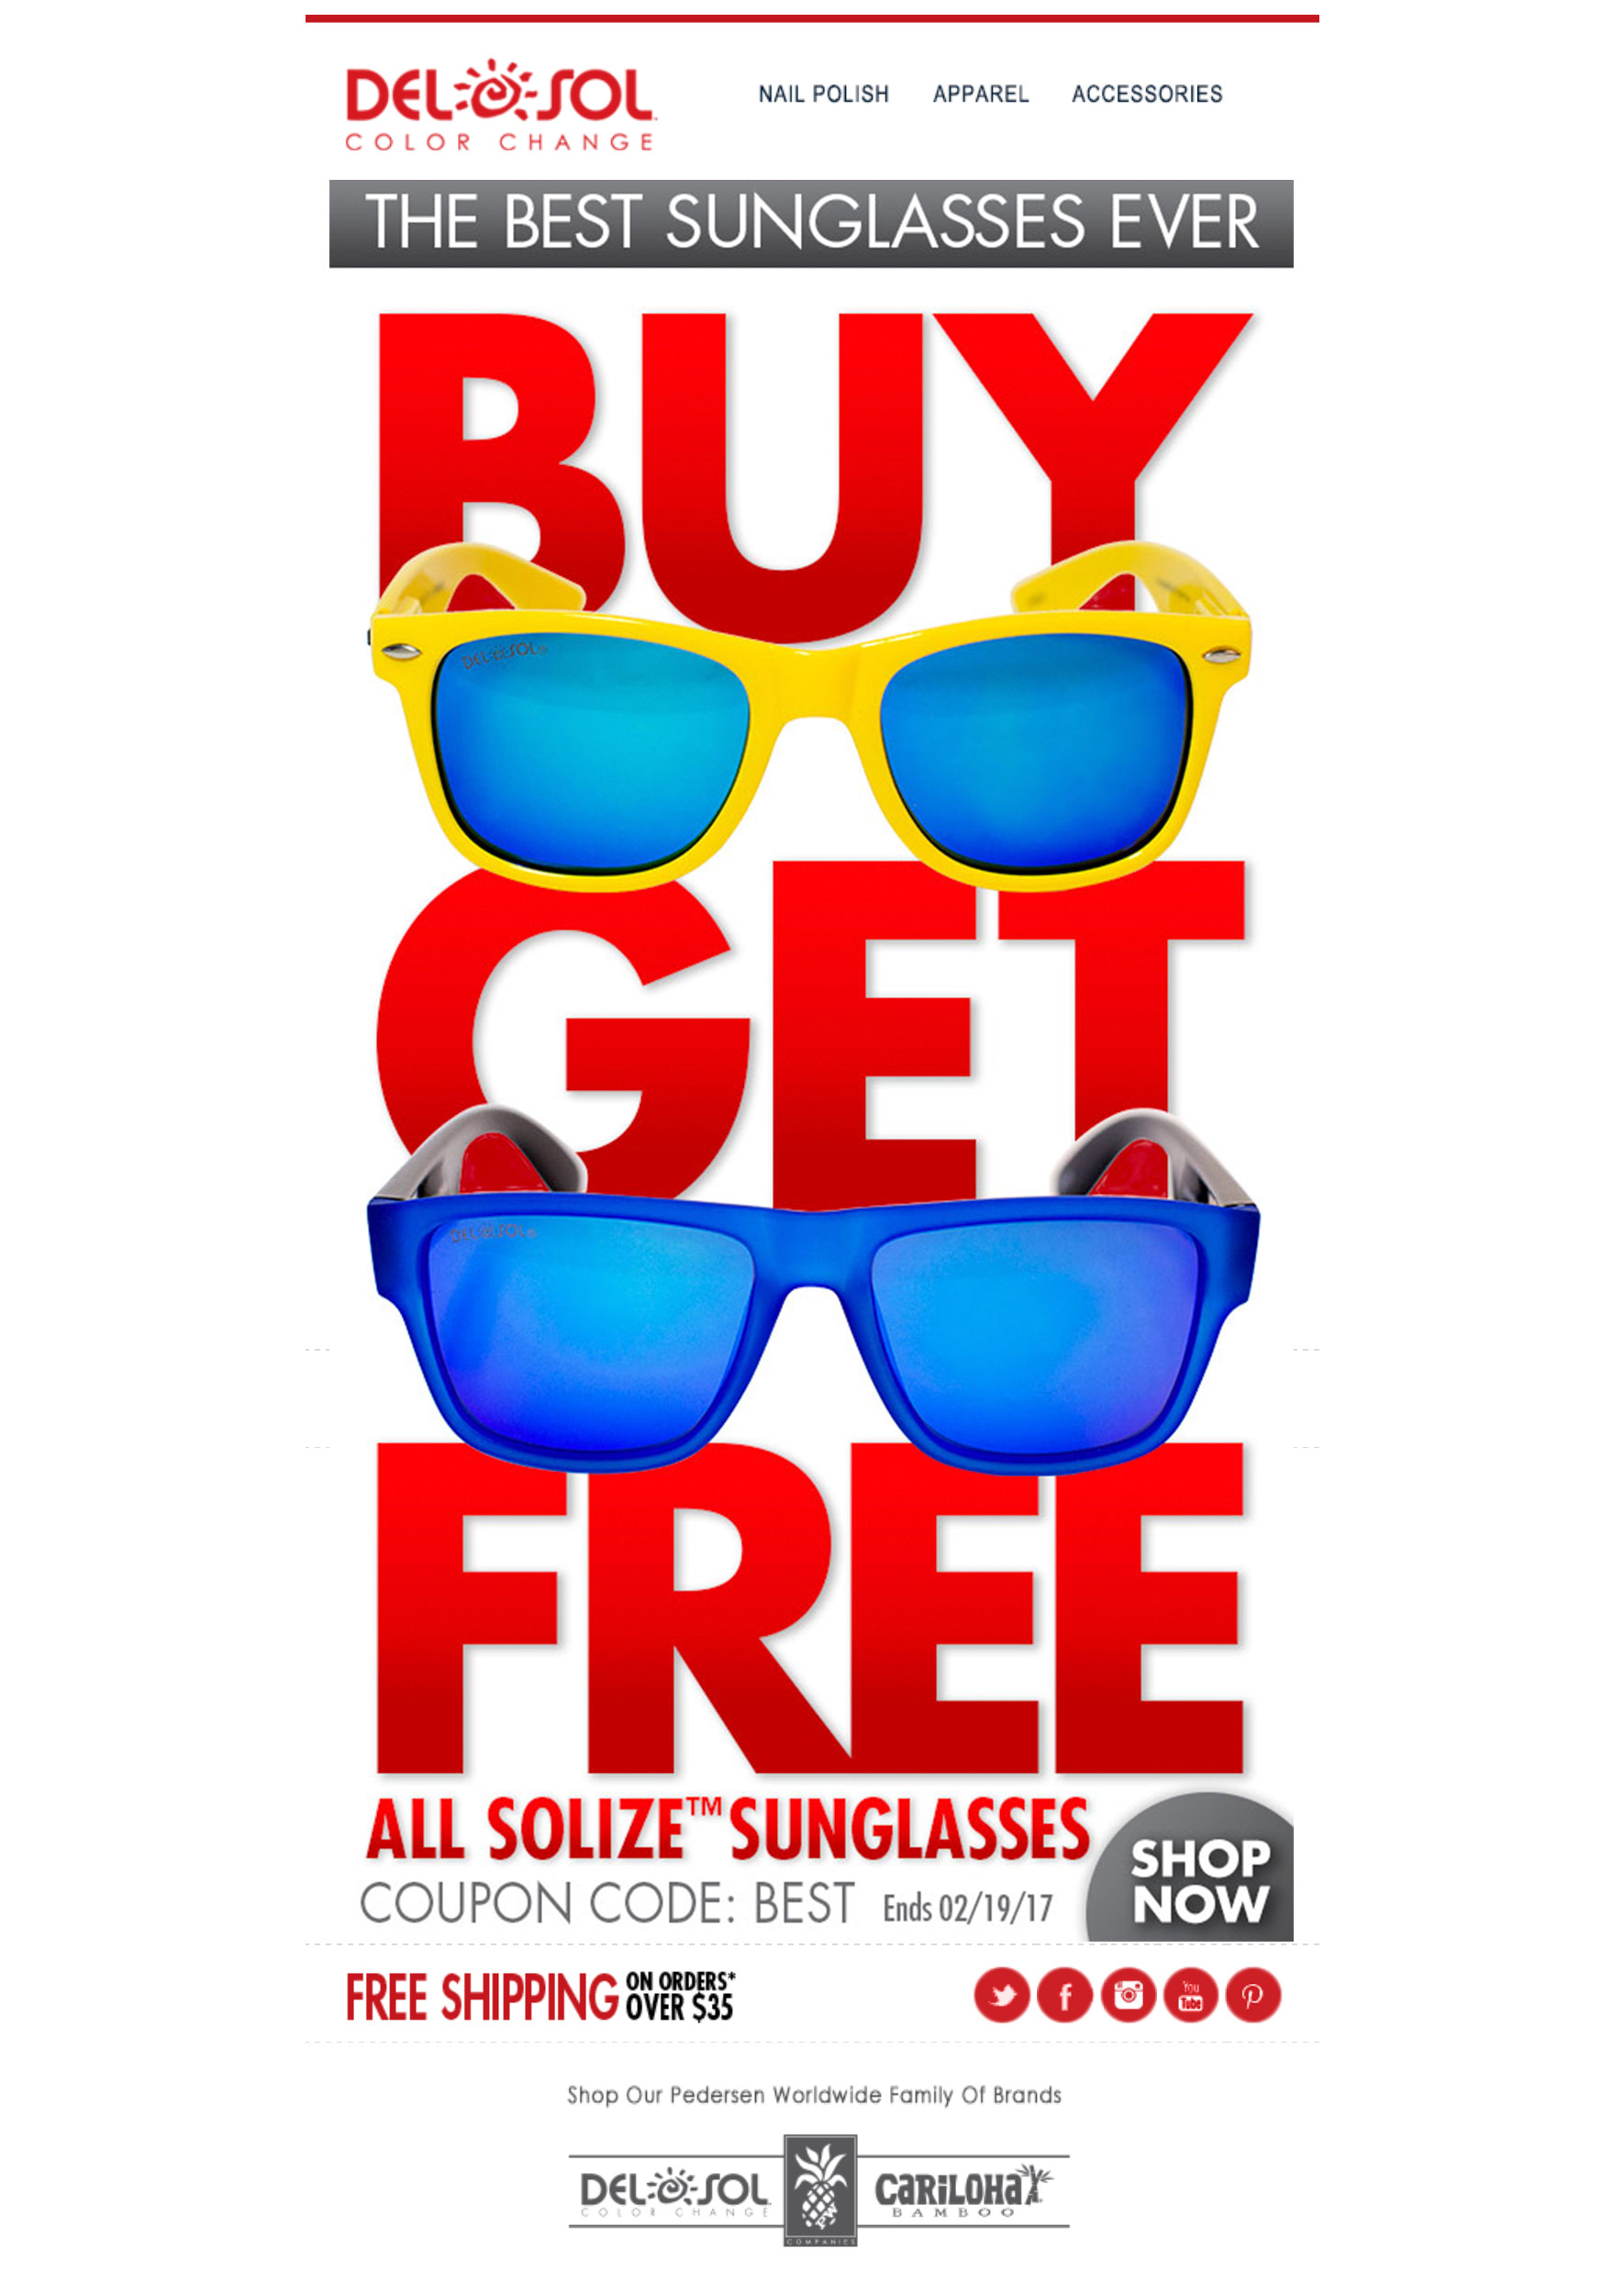 Shot Product Photography and Led Design team for Buy 1 Get 1 Free Solize™ Sunglasses Campaign.